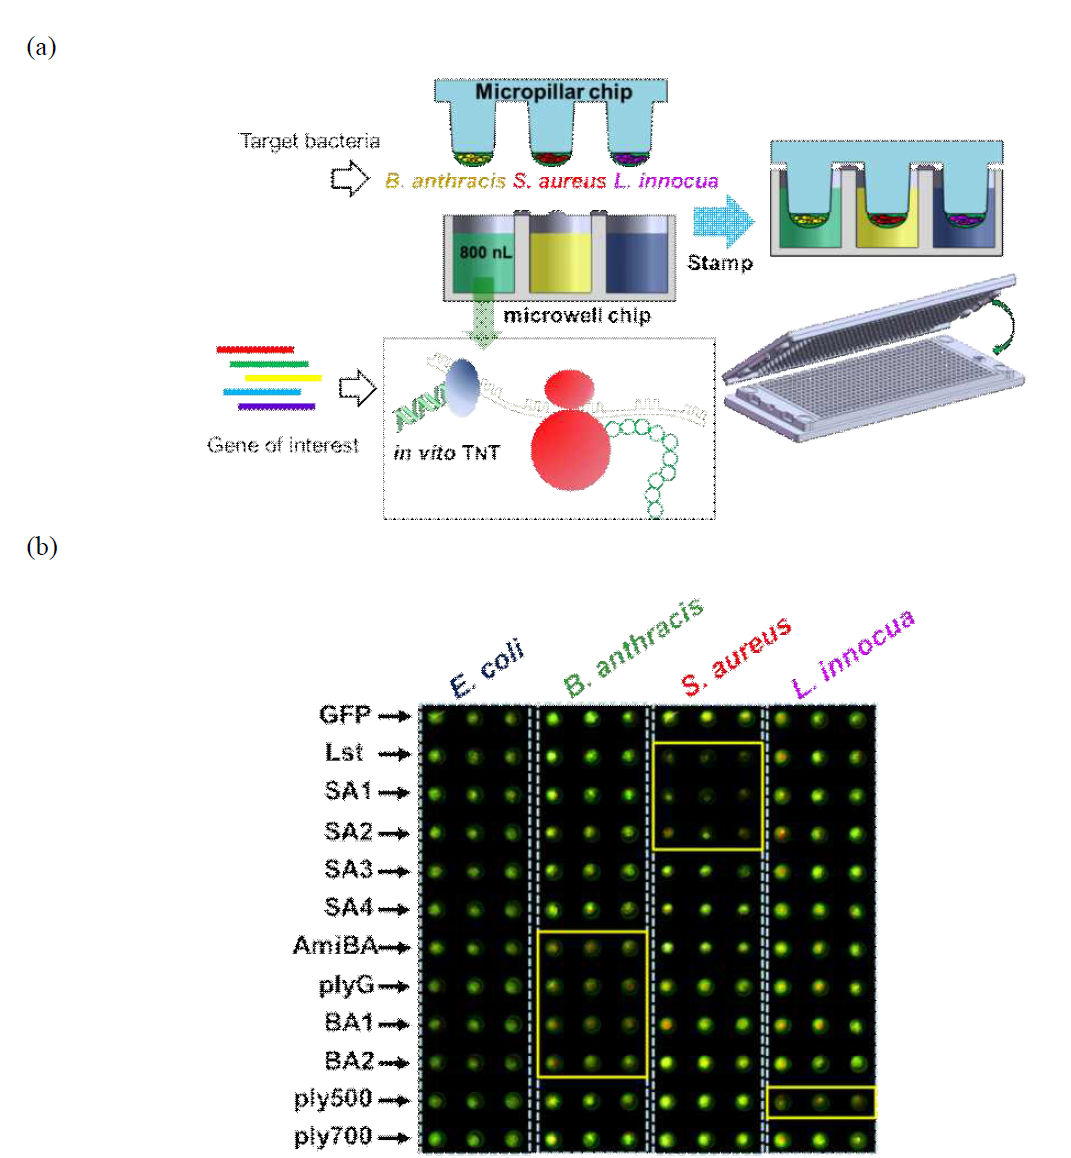 Identification of antimicrobial function of the genes encoding cell lytic enzymes via in vitro TNT-coupled bacterial cell chip protocols. (a) Schematics of cell-free protein expression with in vitro TNT, followed by evaluating antimicrobial activity in a bacterial cell chip. (b) Scanned image of cell viability of four different pathogens treated with 11 cell lytic enzymes and a negative control (GFP) synthesized by in vitro TNT in the chip